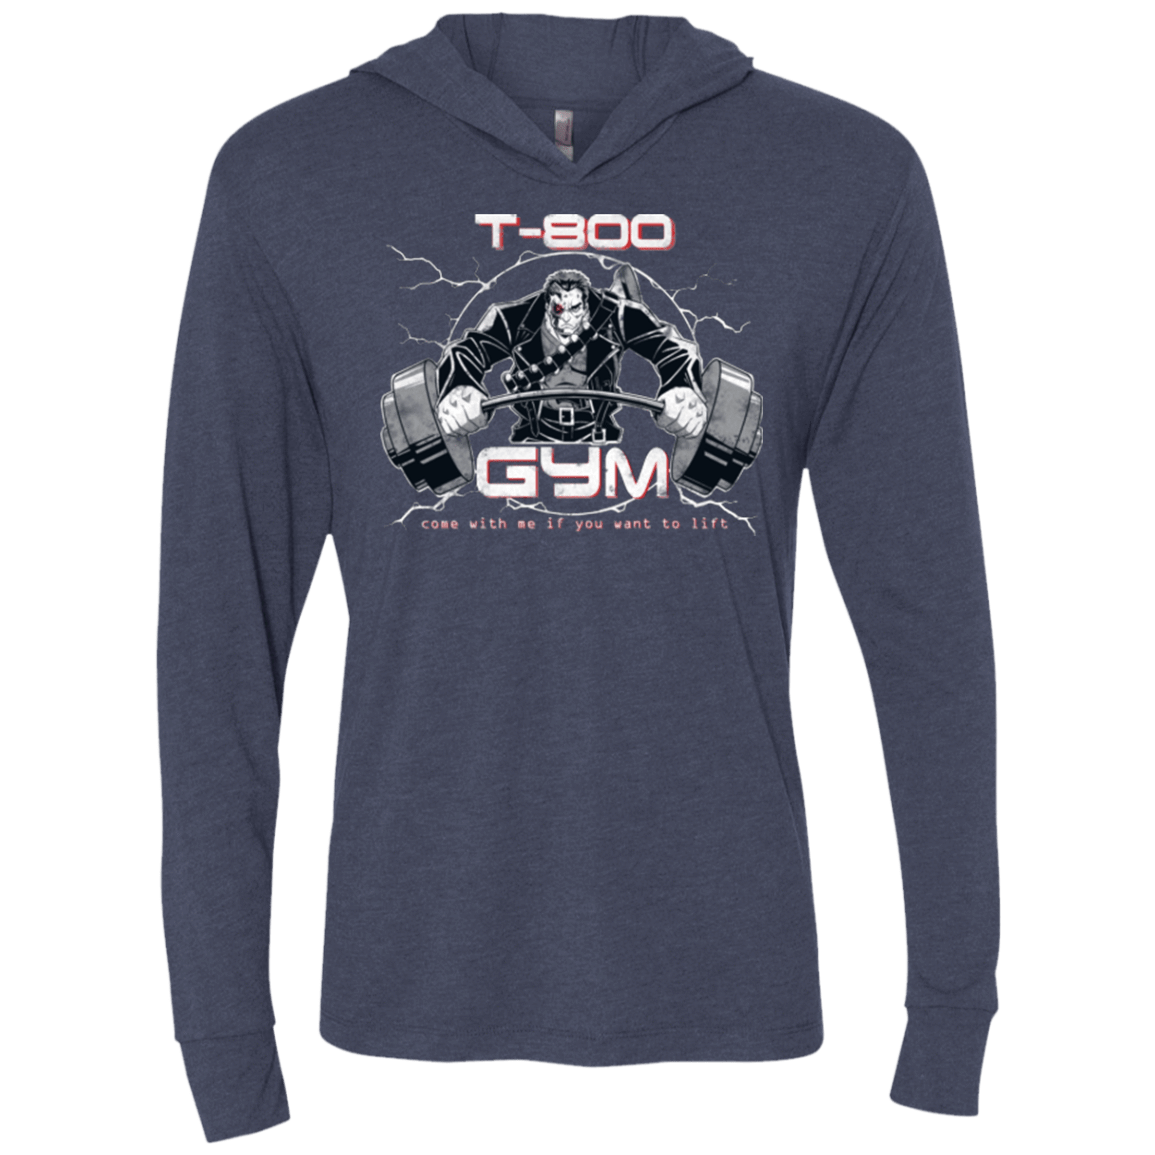 T-Shirts Vintage Navy / X-Small T-800 gym Triblend Long Sleeve Hoodie Tee